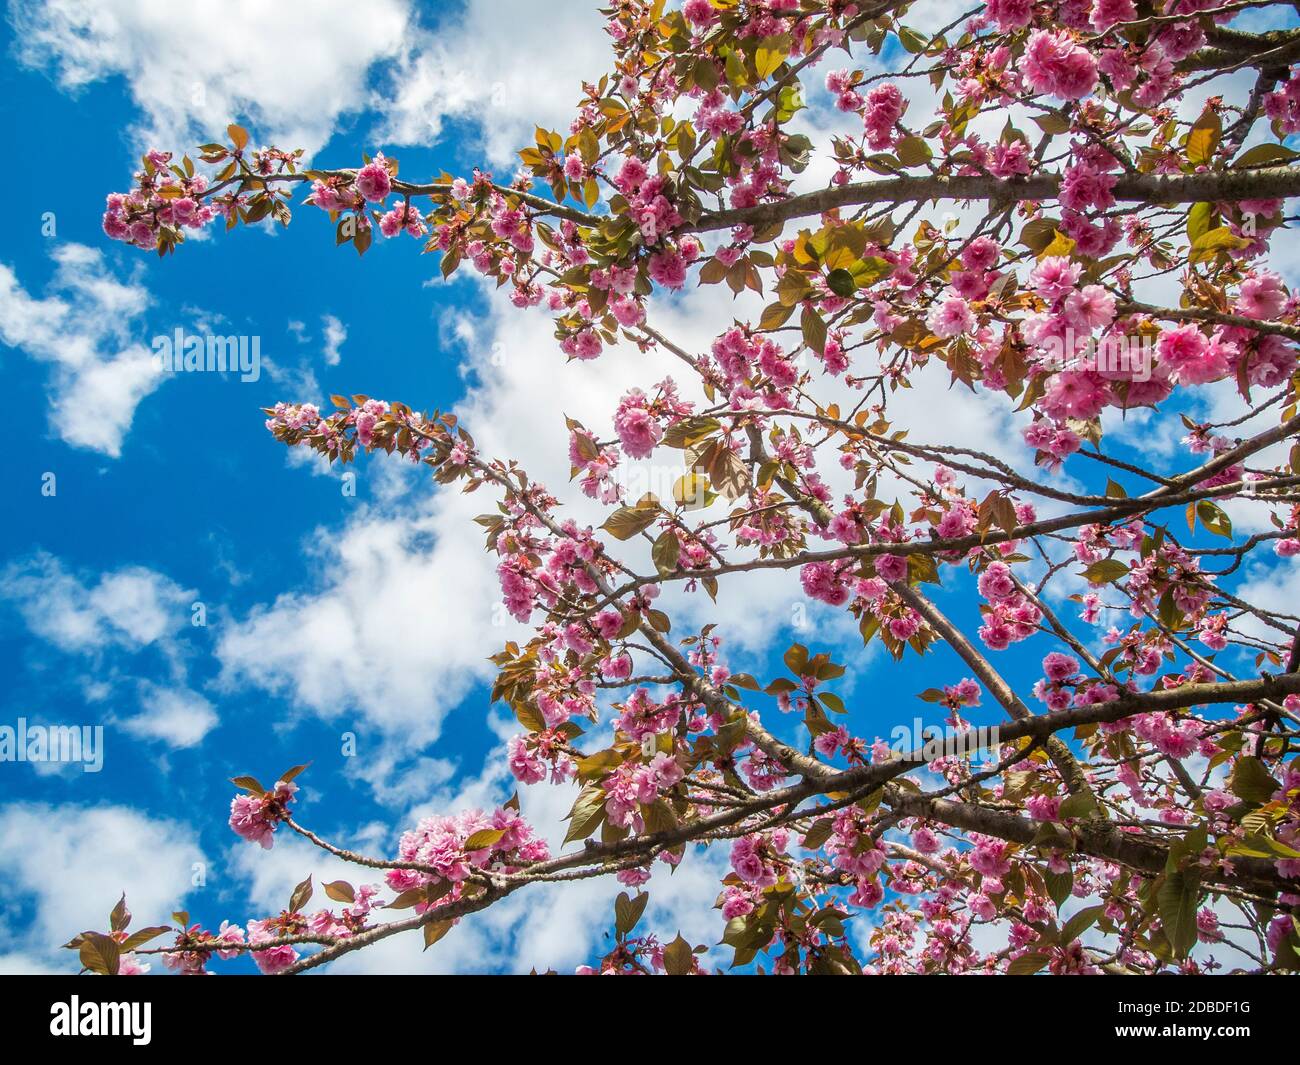 Low angle view of tree branches with cherry blossoms against a blue sky with white clouds in Brandenburg / Germany. Stock Photo